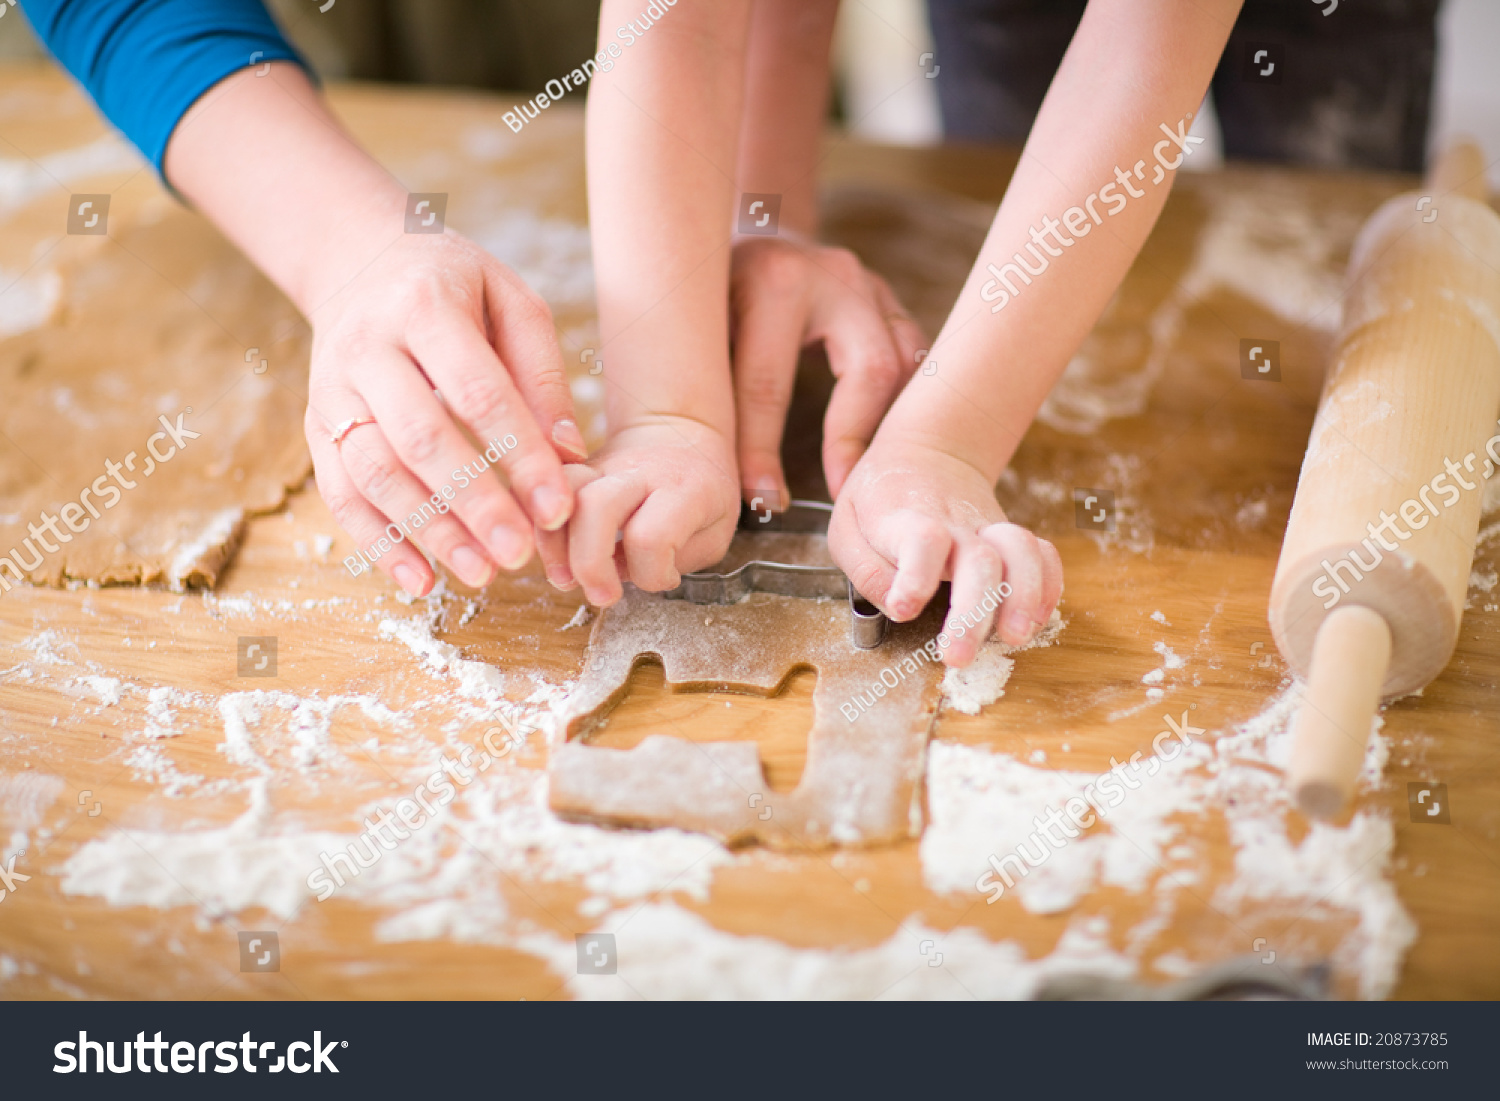 Young mother and son in kitchen making cookies. #20873785